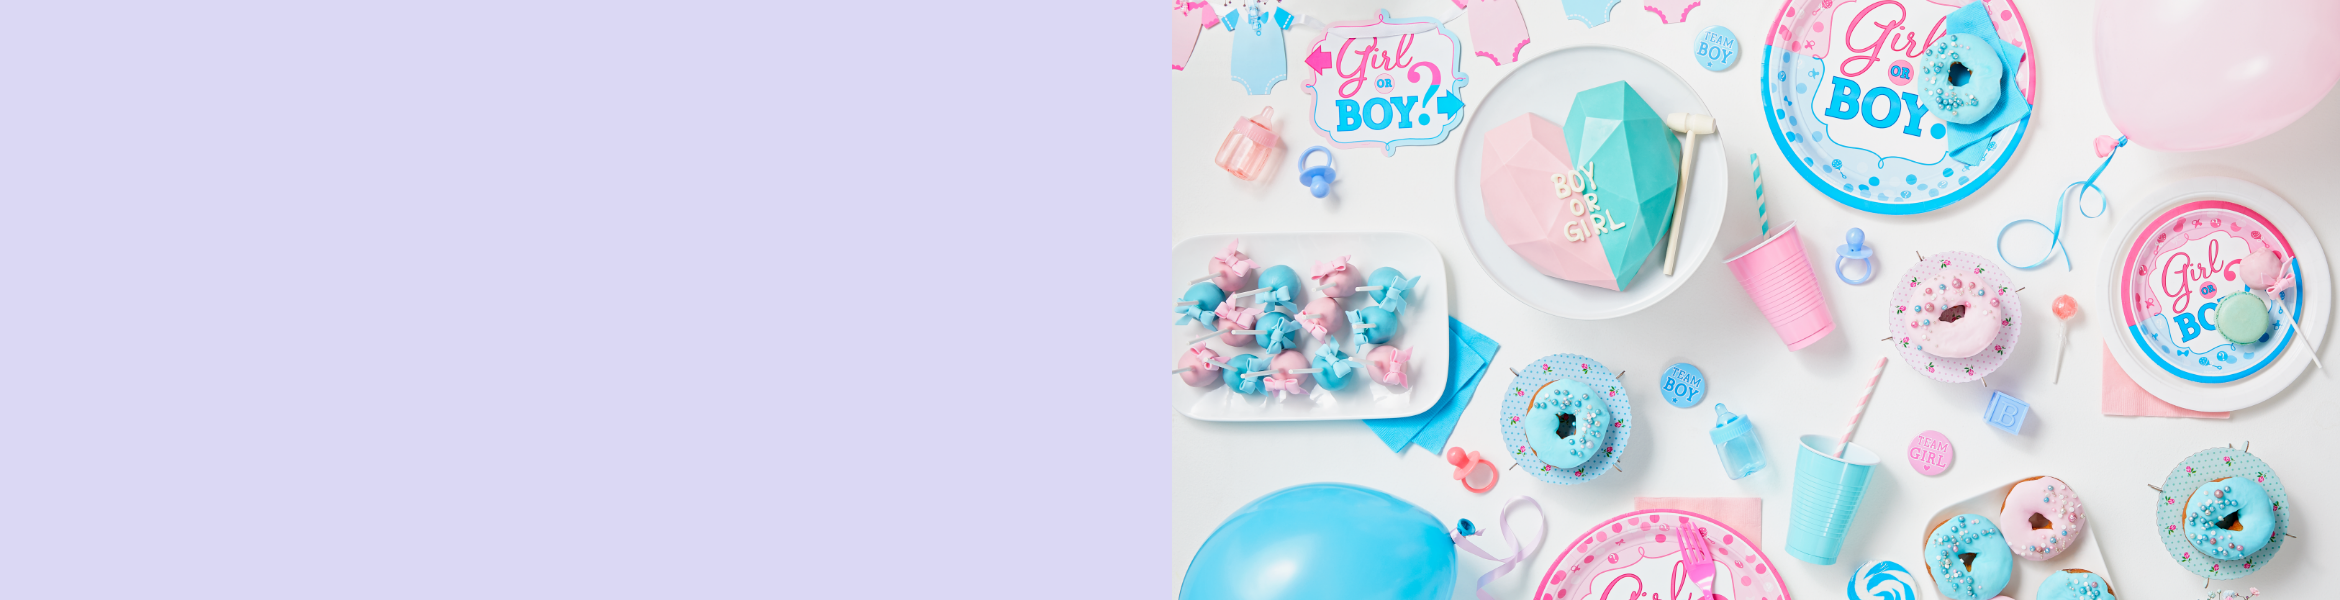 Gender Reveal Party Party City